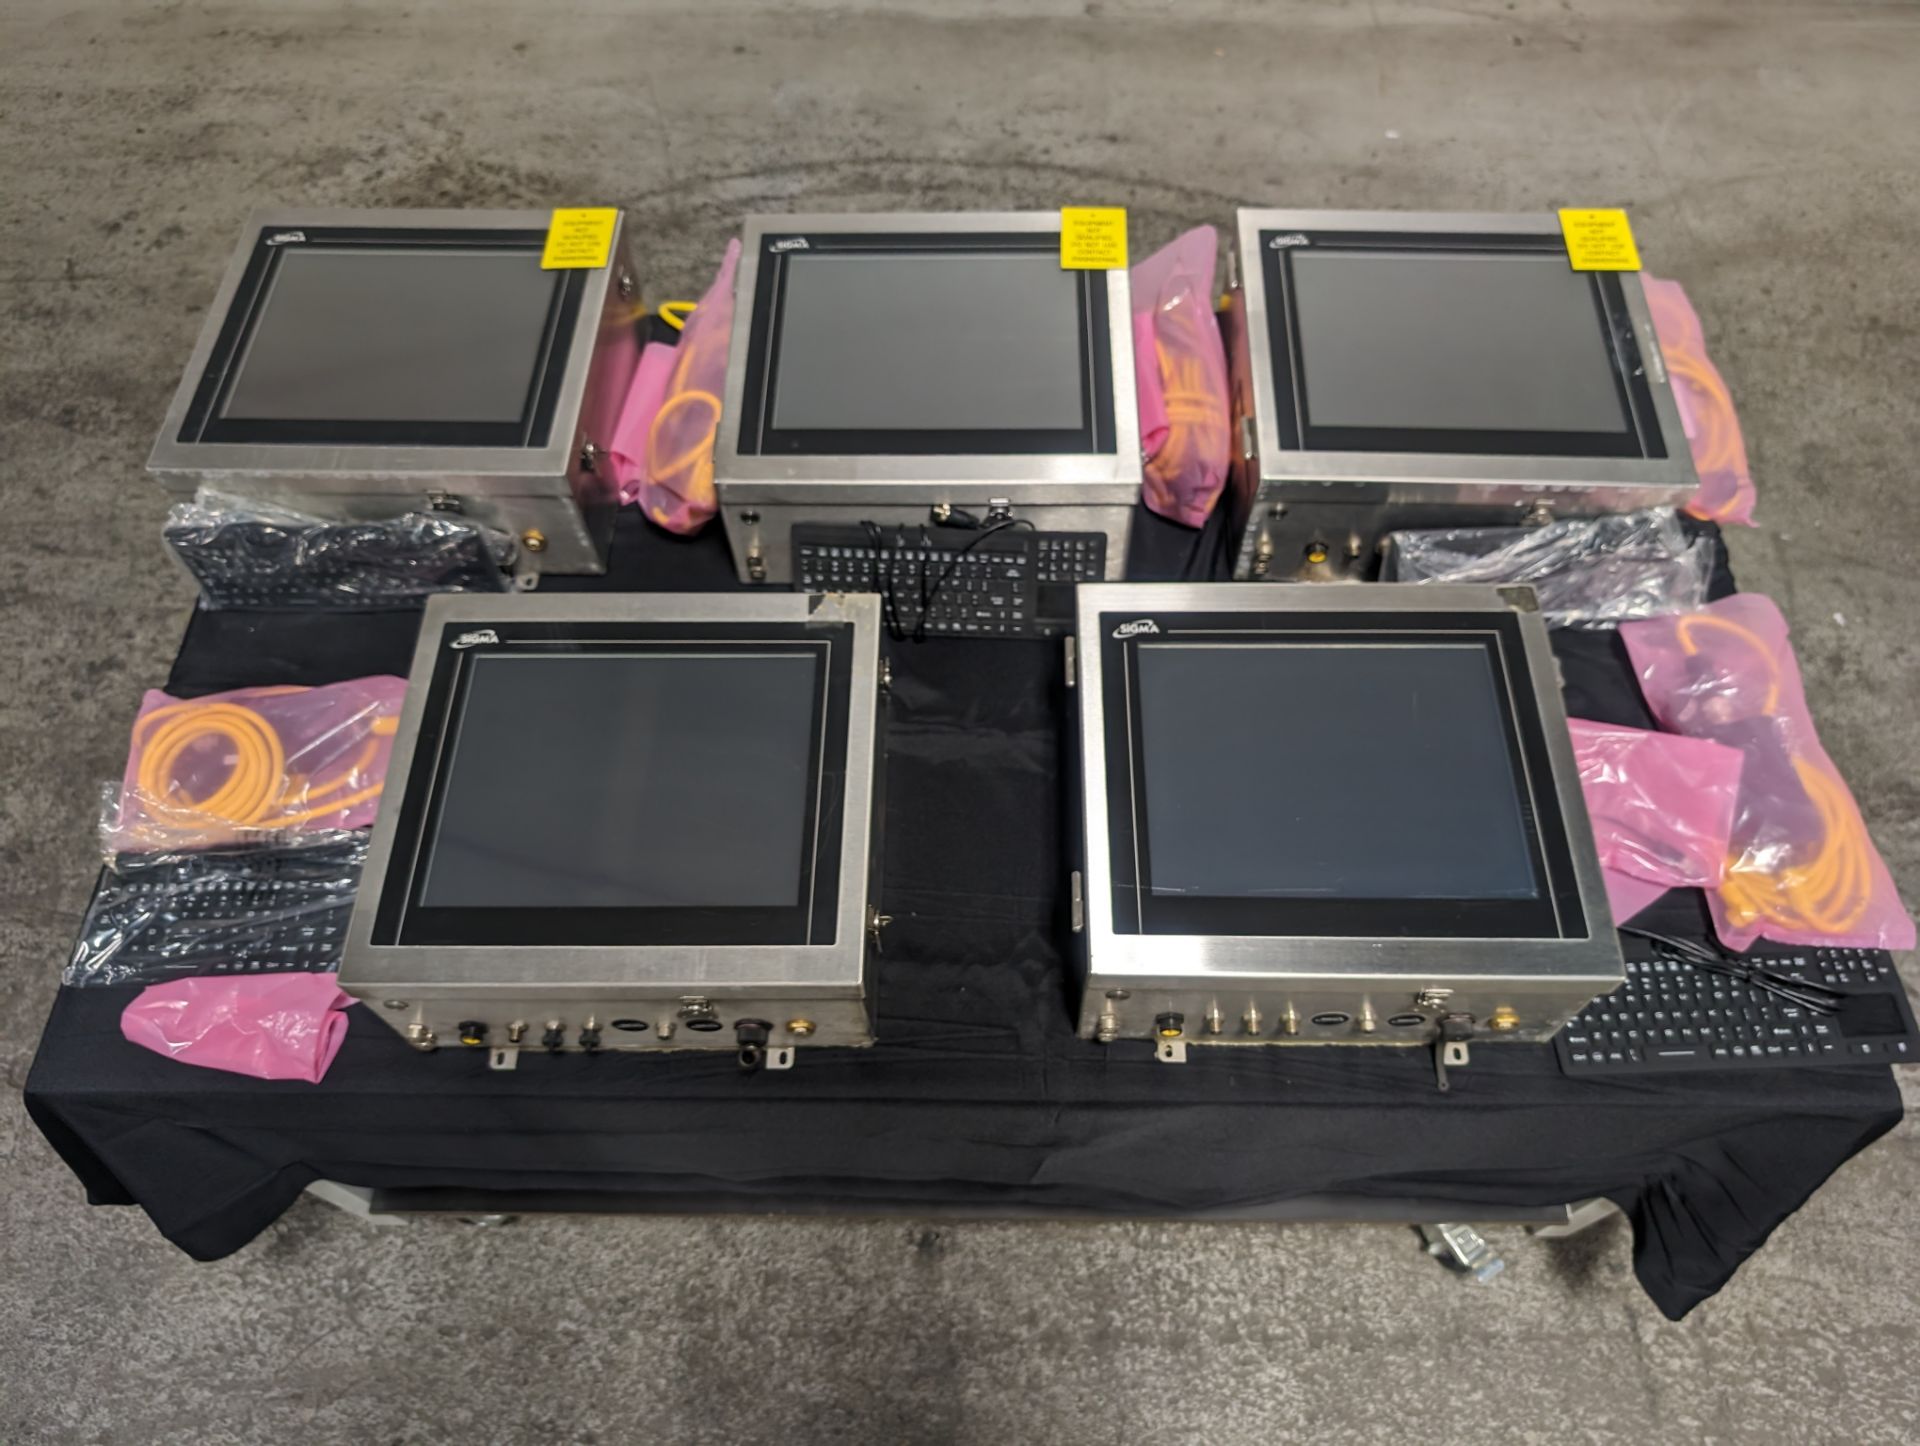 Lot of 5 Sigma display monitors with wires and keyboard